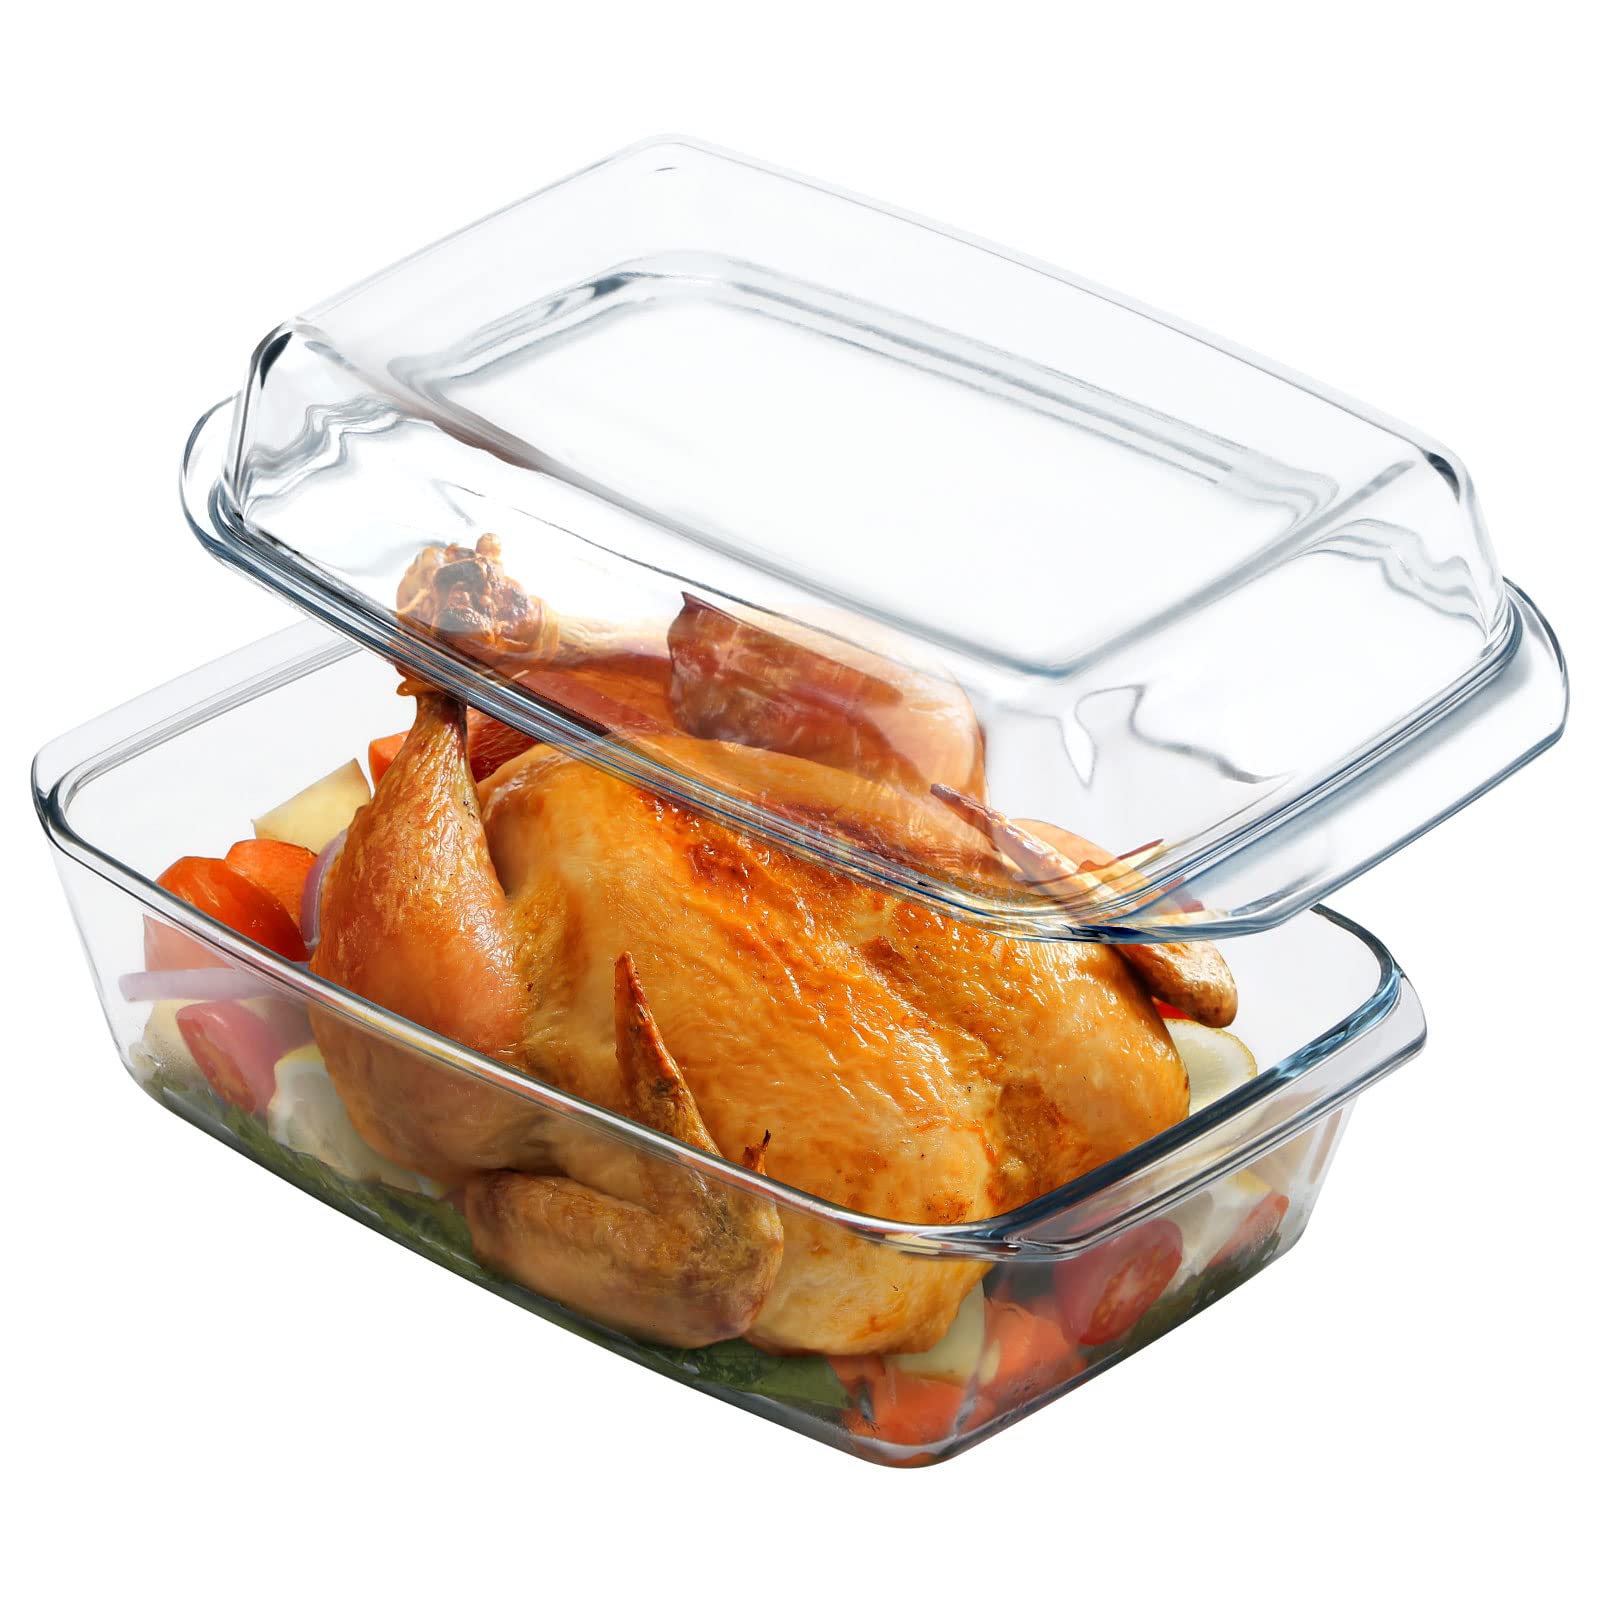 Large 5.2 QT (2QT Glass Lid + 3.2QT Glass Baking Dish), 2-in-1 Rectangular Glass Casserole Dish With Glass Lid, Deep (3in Depth) Glass Bakeware for Oven Safe